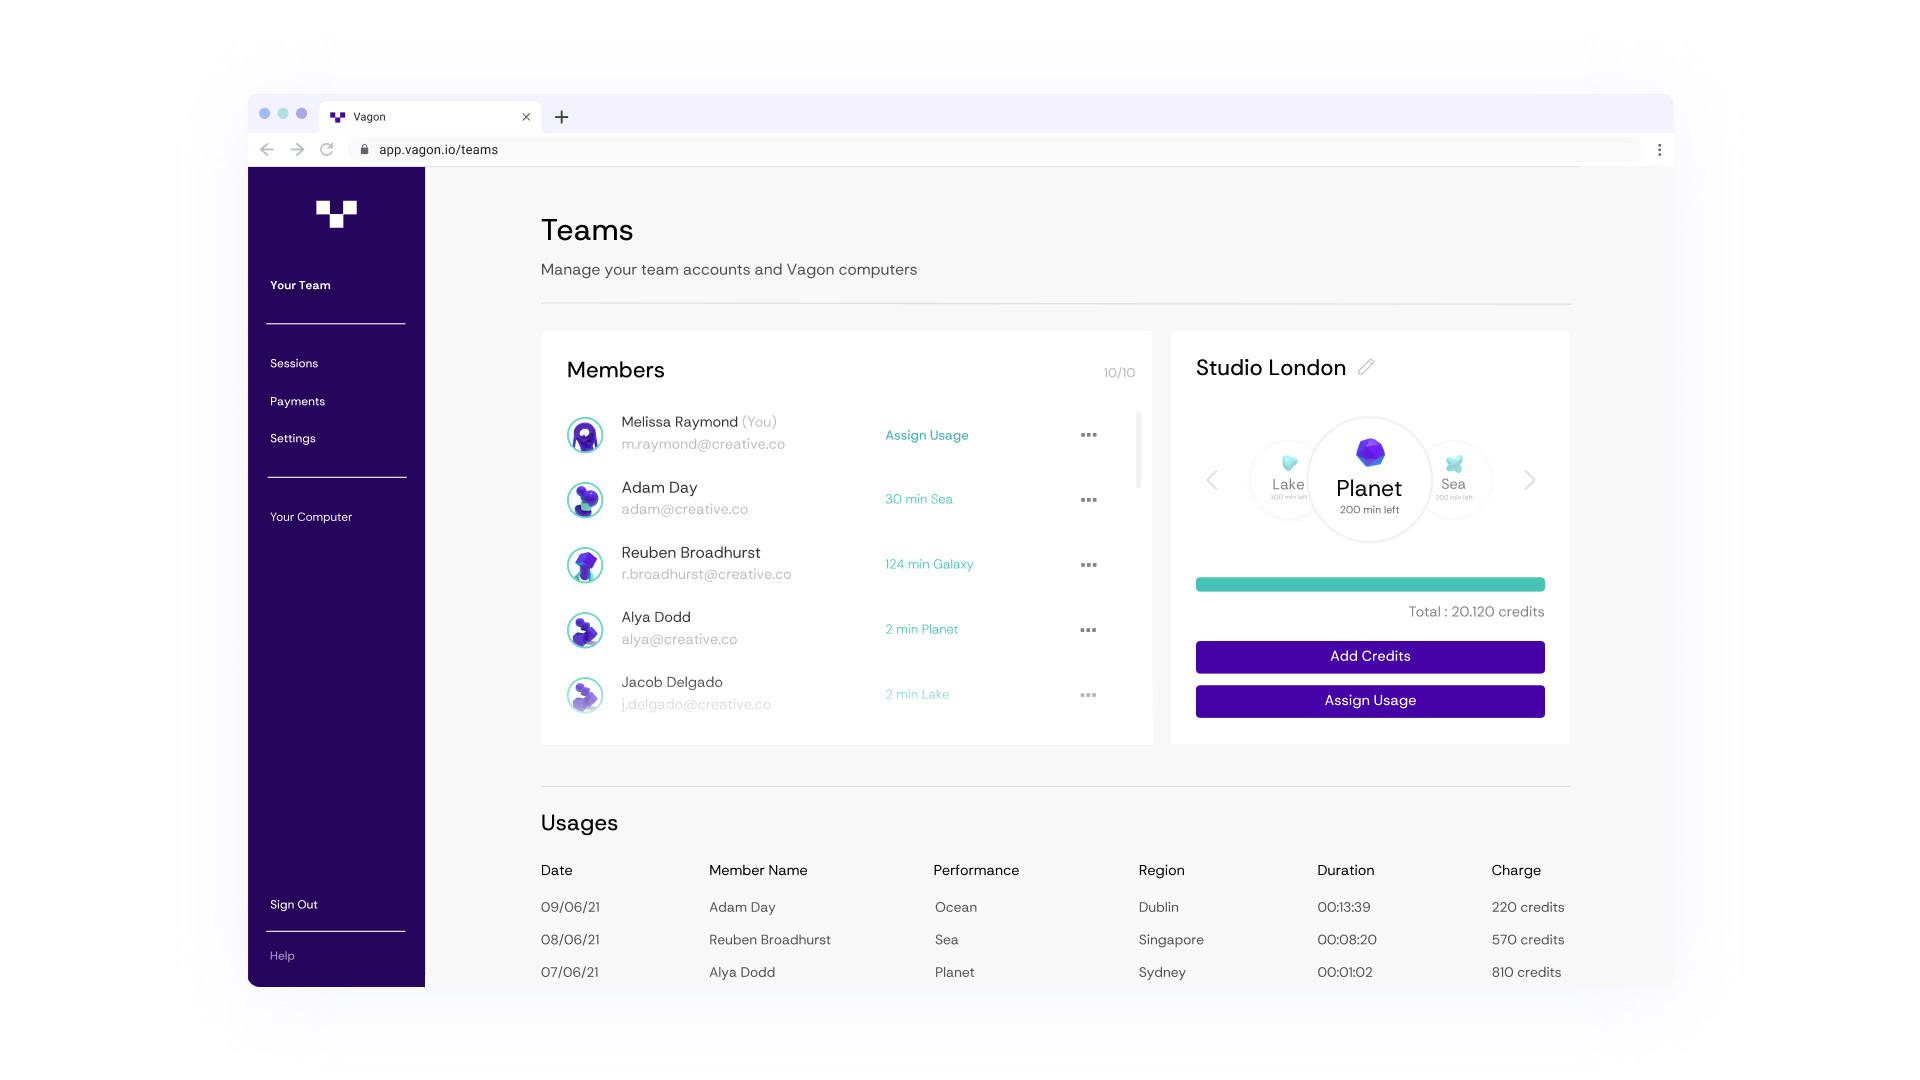 Teams Dashboard, Manage your team accounts and Vagon computers easily.